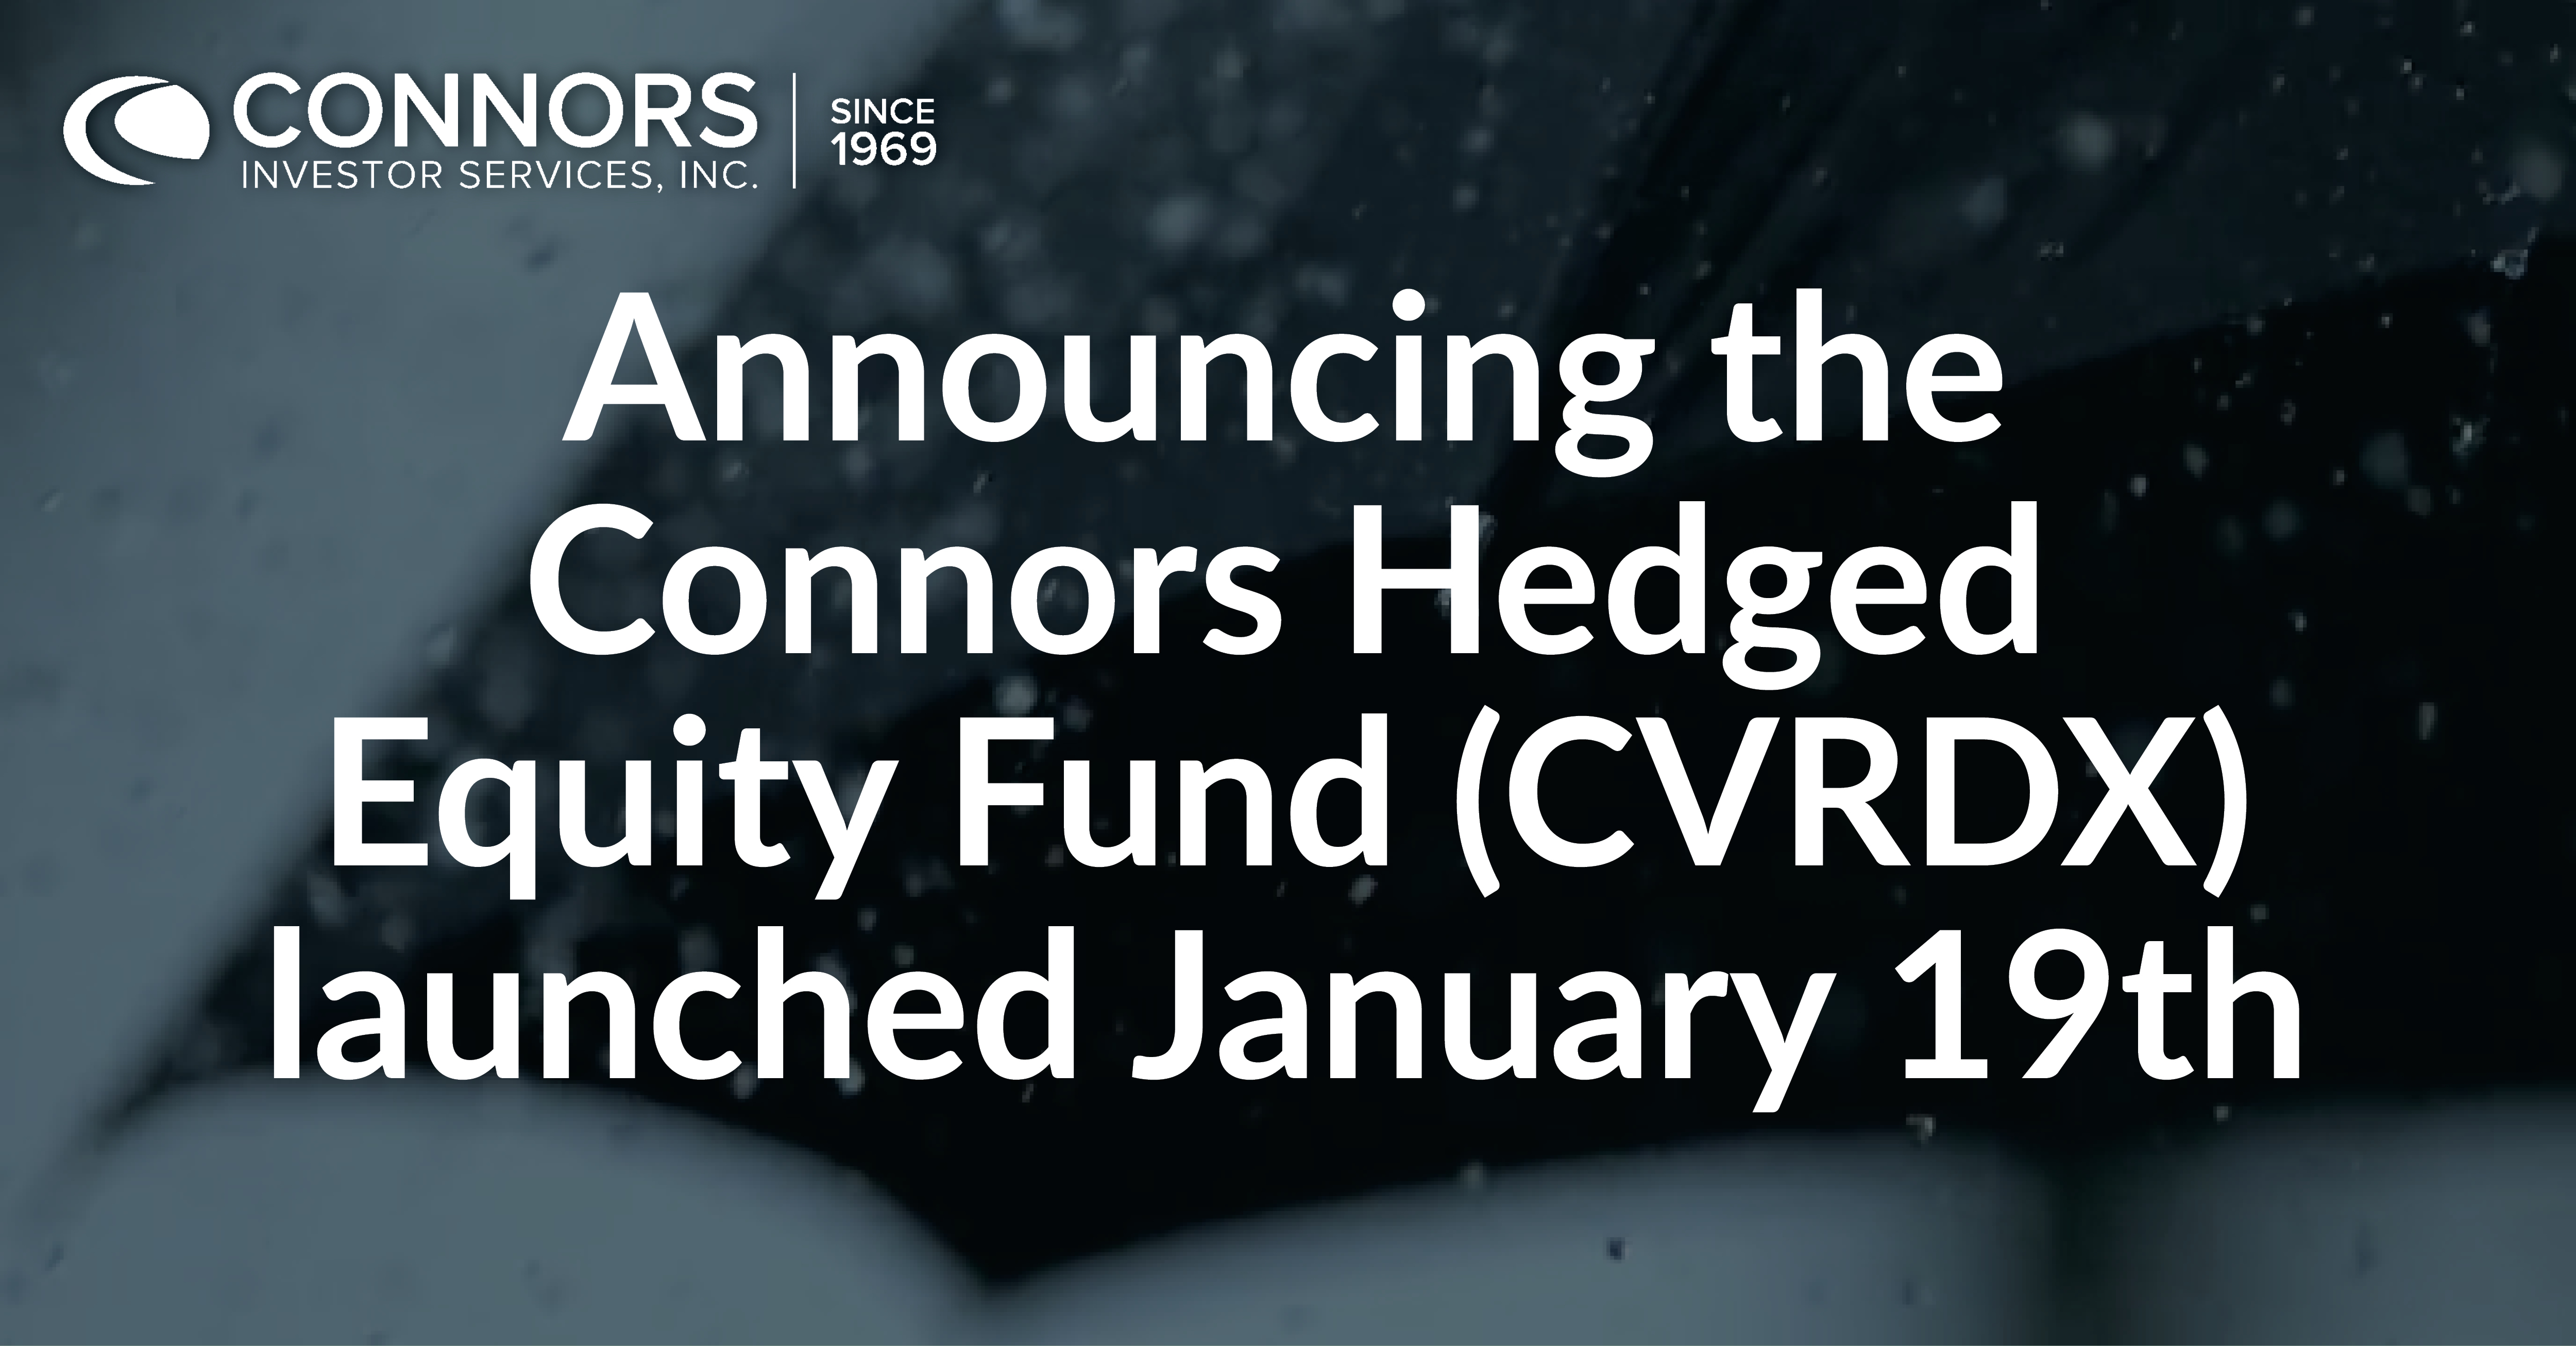 Announcing the Connors Hedged Equity Fund (CVRDX) launched January 19th